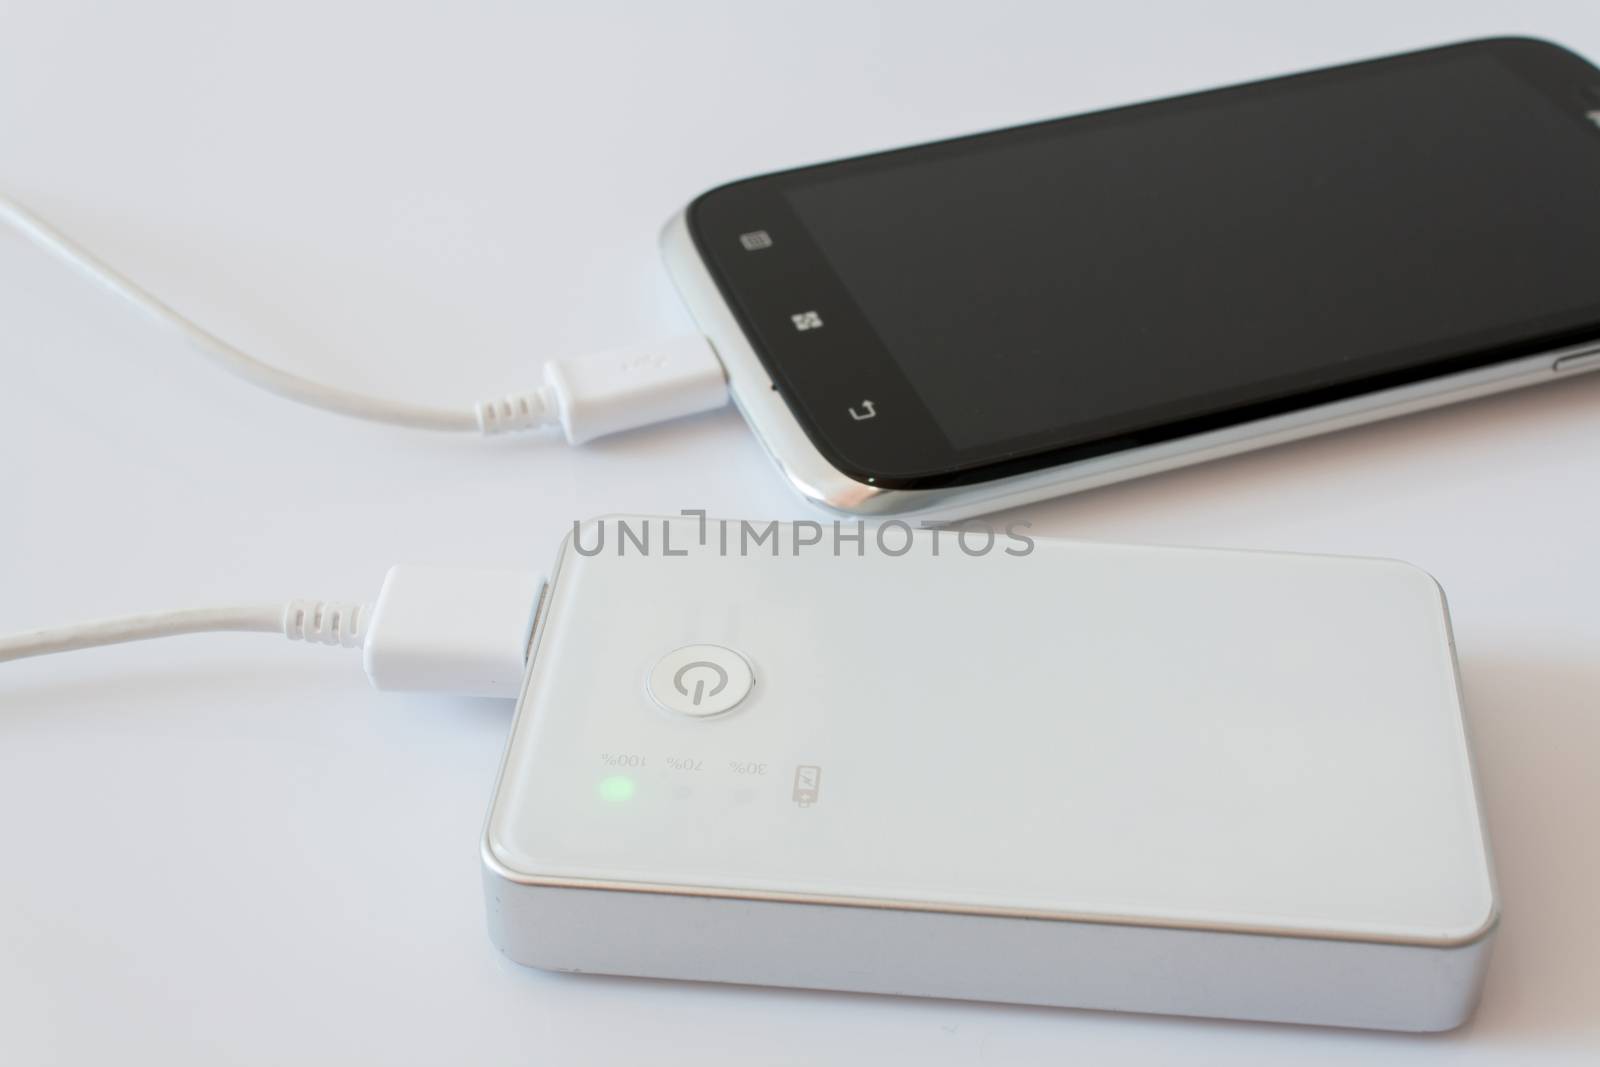 Smartphone is charging with power bank while it standby